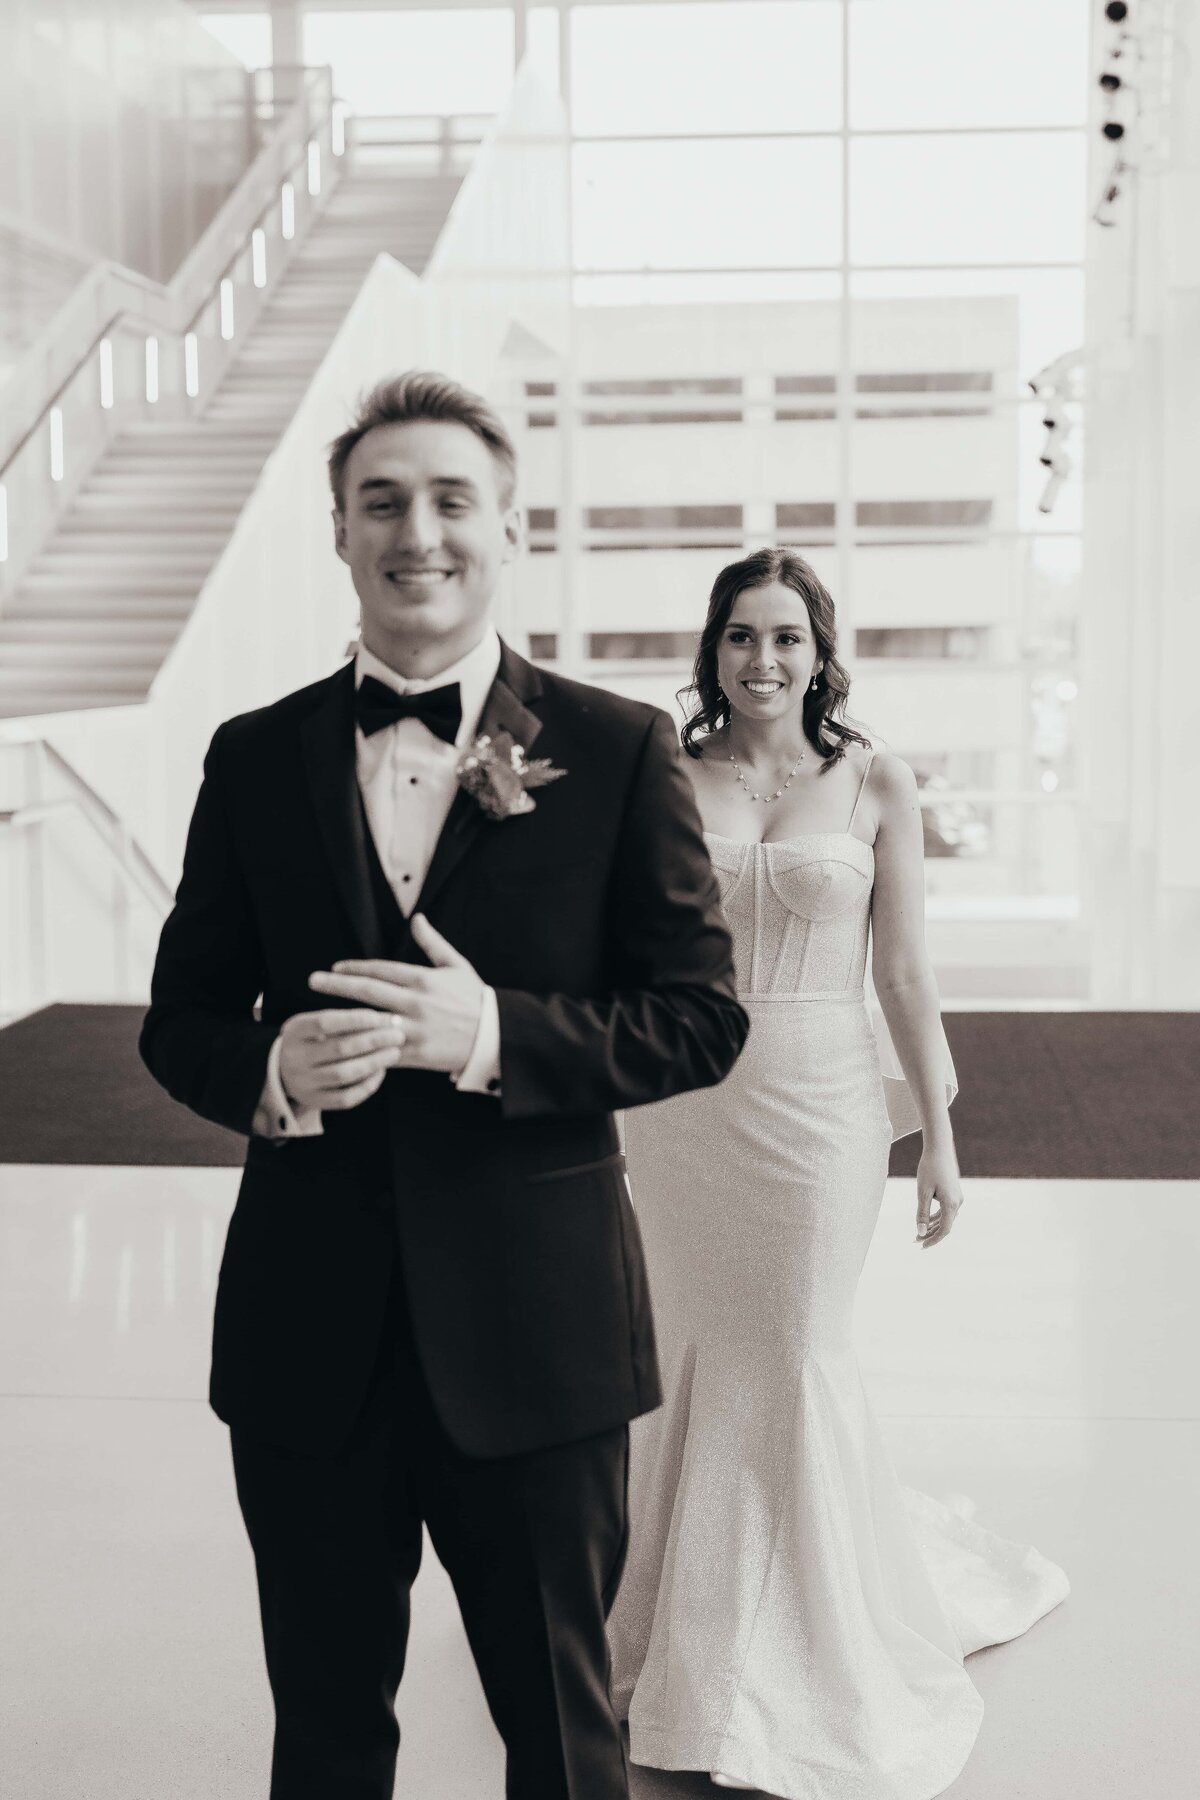 A bride and groom smiling in a modern building with white stairs and large windows at an Iowa wedding.